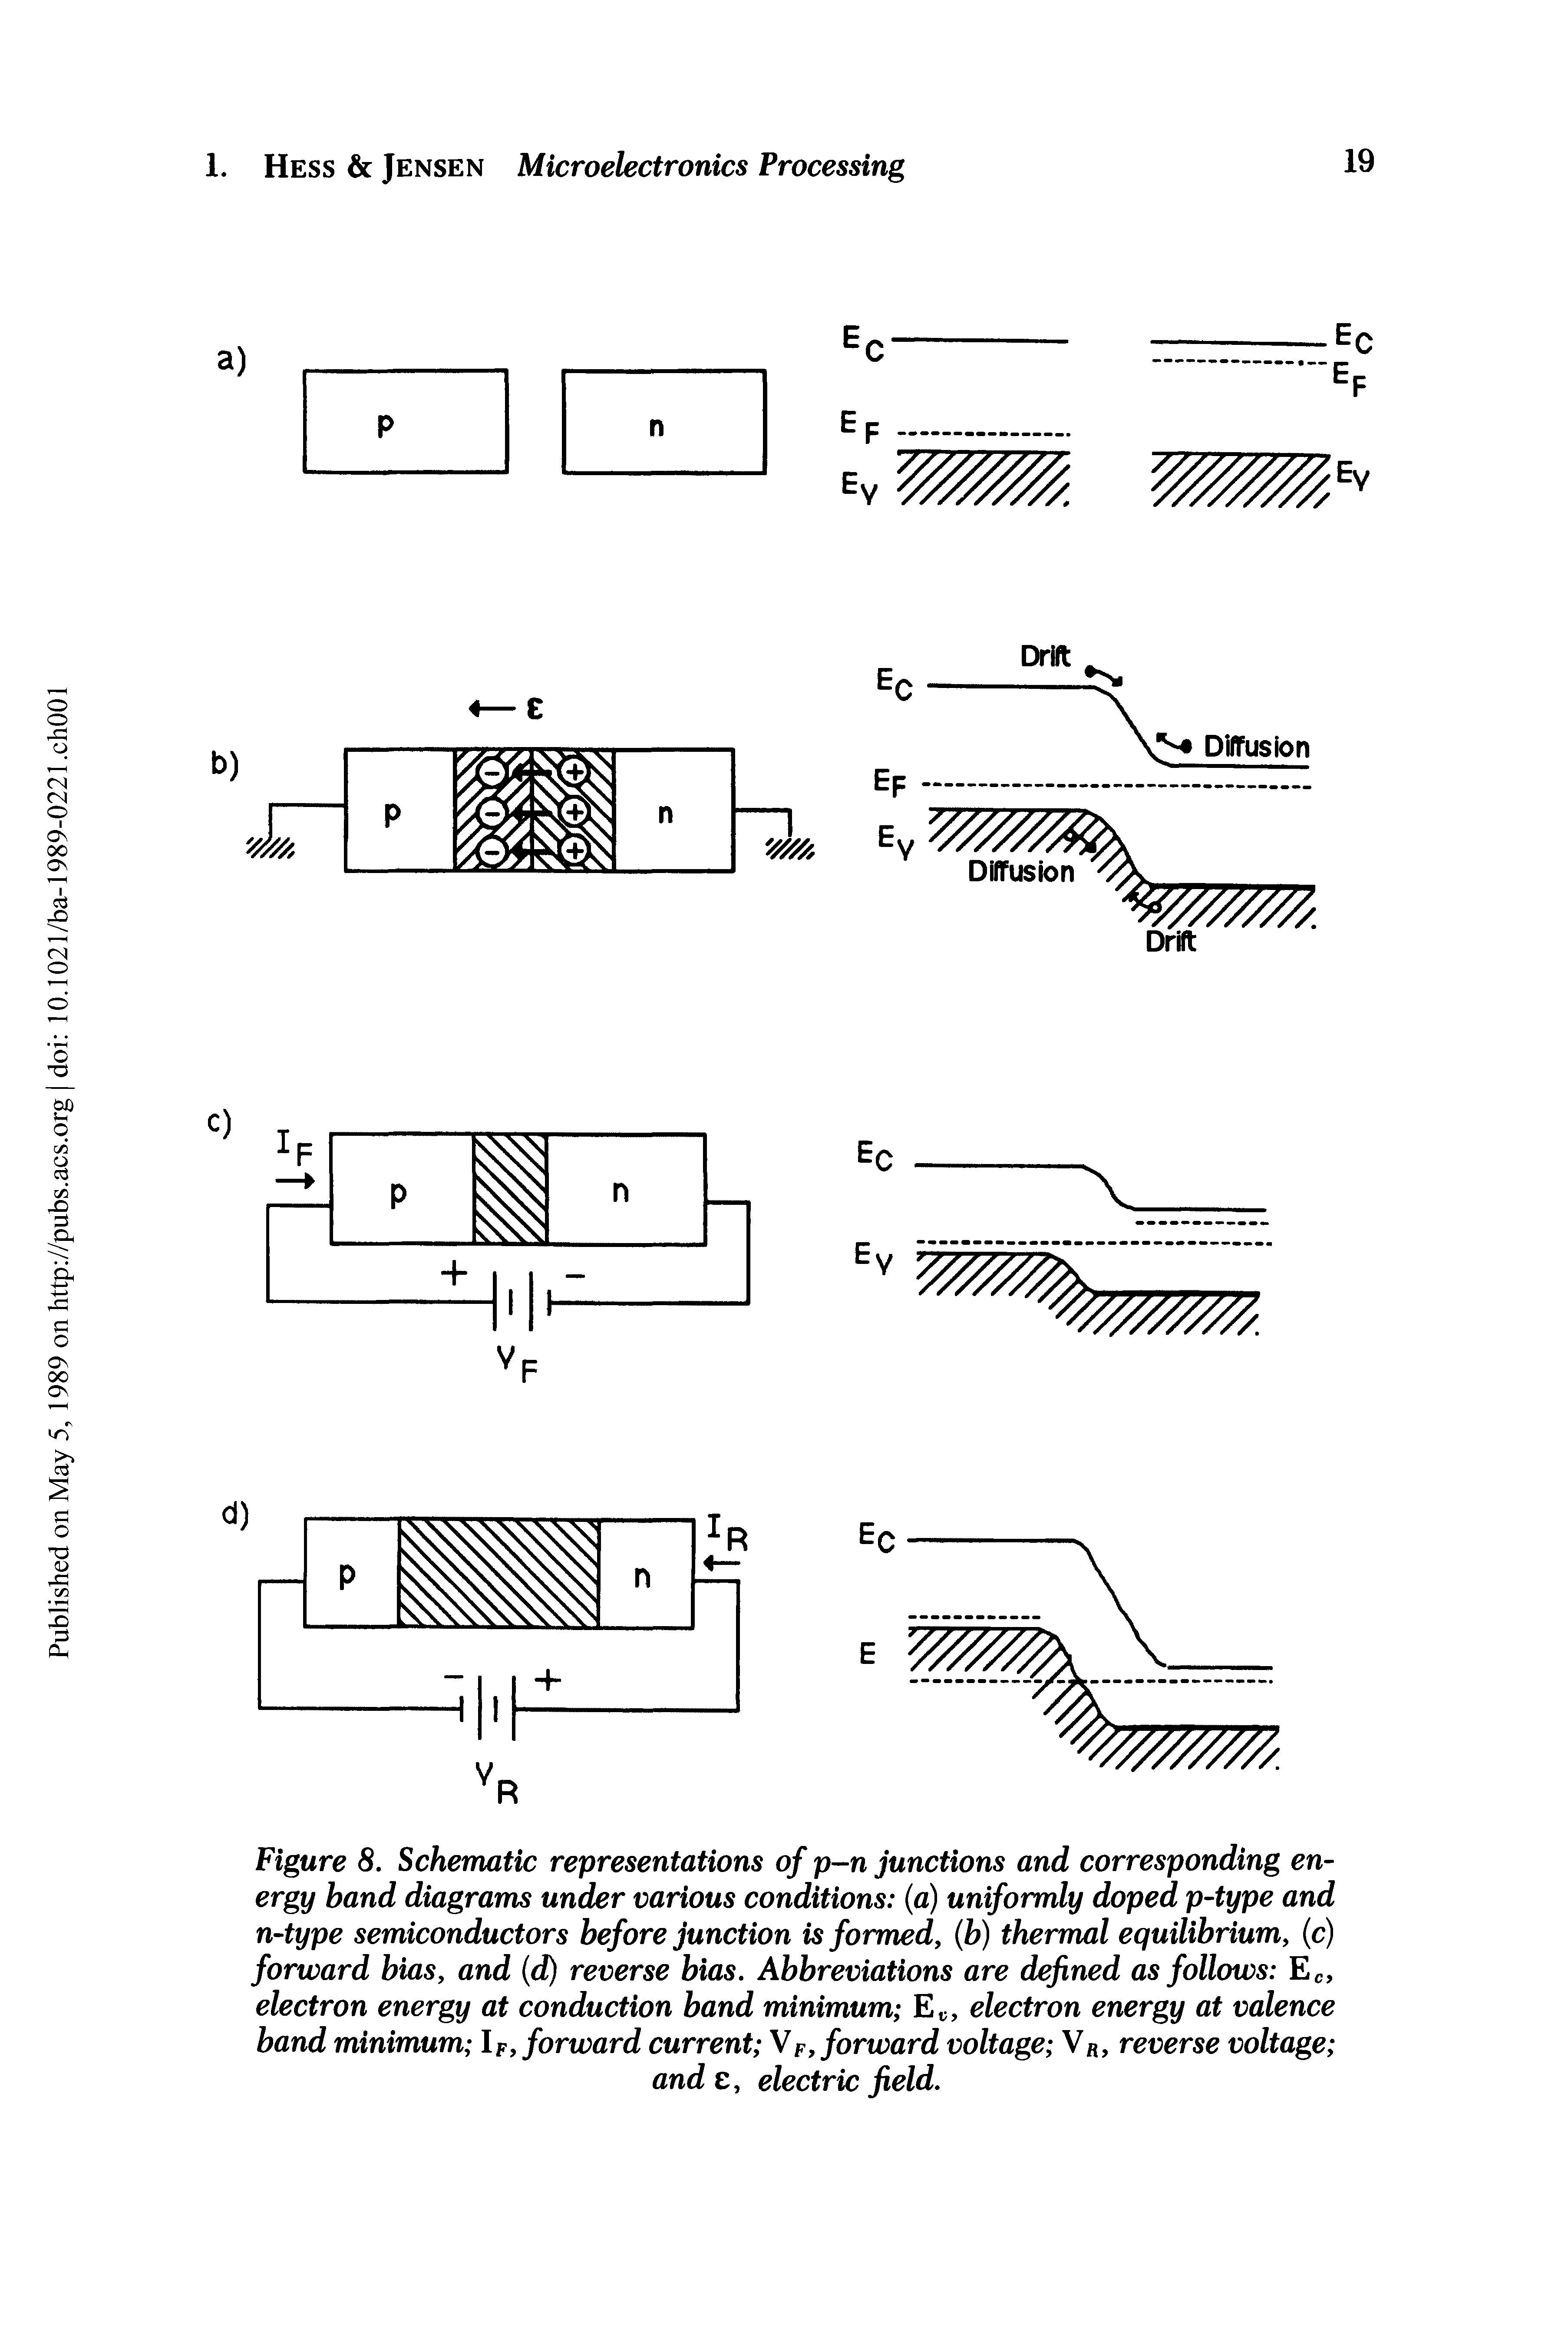 Figure 8. Schematic representations of p-n junctions and corresponding energy band diagrams under various conditions (a) uniformly doped p-type and n-type semiconductors before junction is formed, (b) thermal equilibrium, (c) forward bias, and (d) reverse bias. Abbreviations are defined as follows Ec, electron energy at conduction band minimum E, , electron energy at valence band minimum IF, forward current Vf, forward voltage Vr, reverse voltage ...